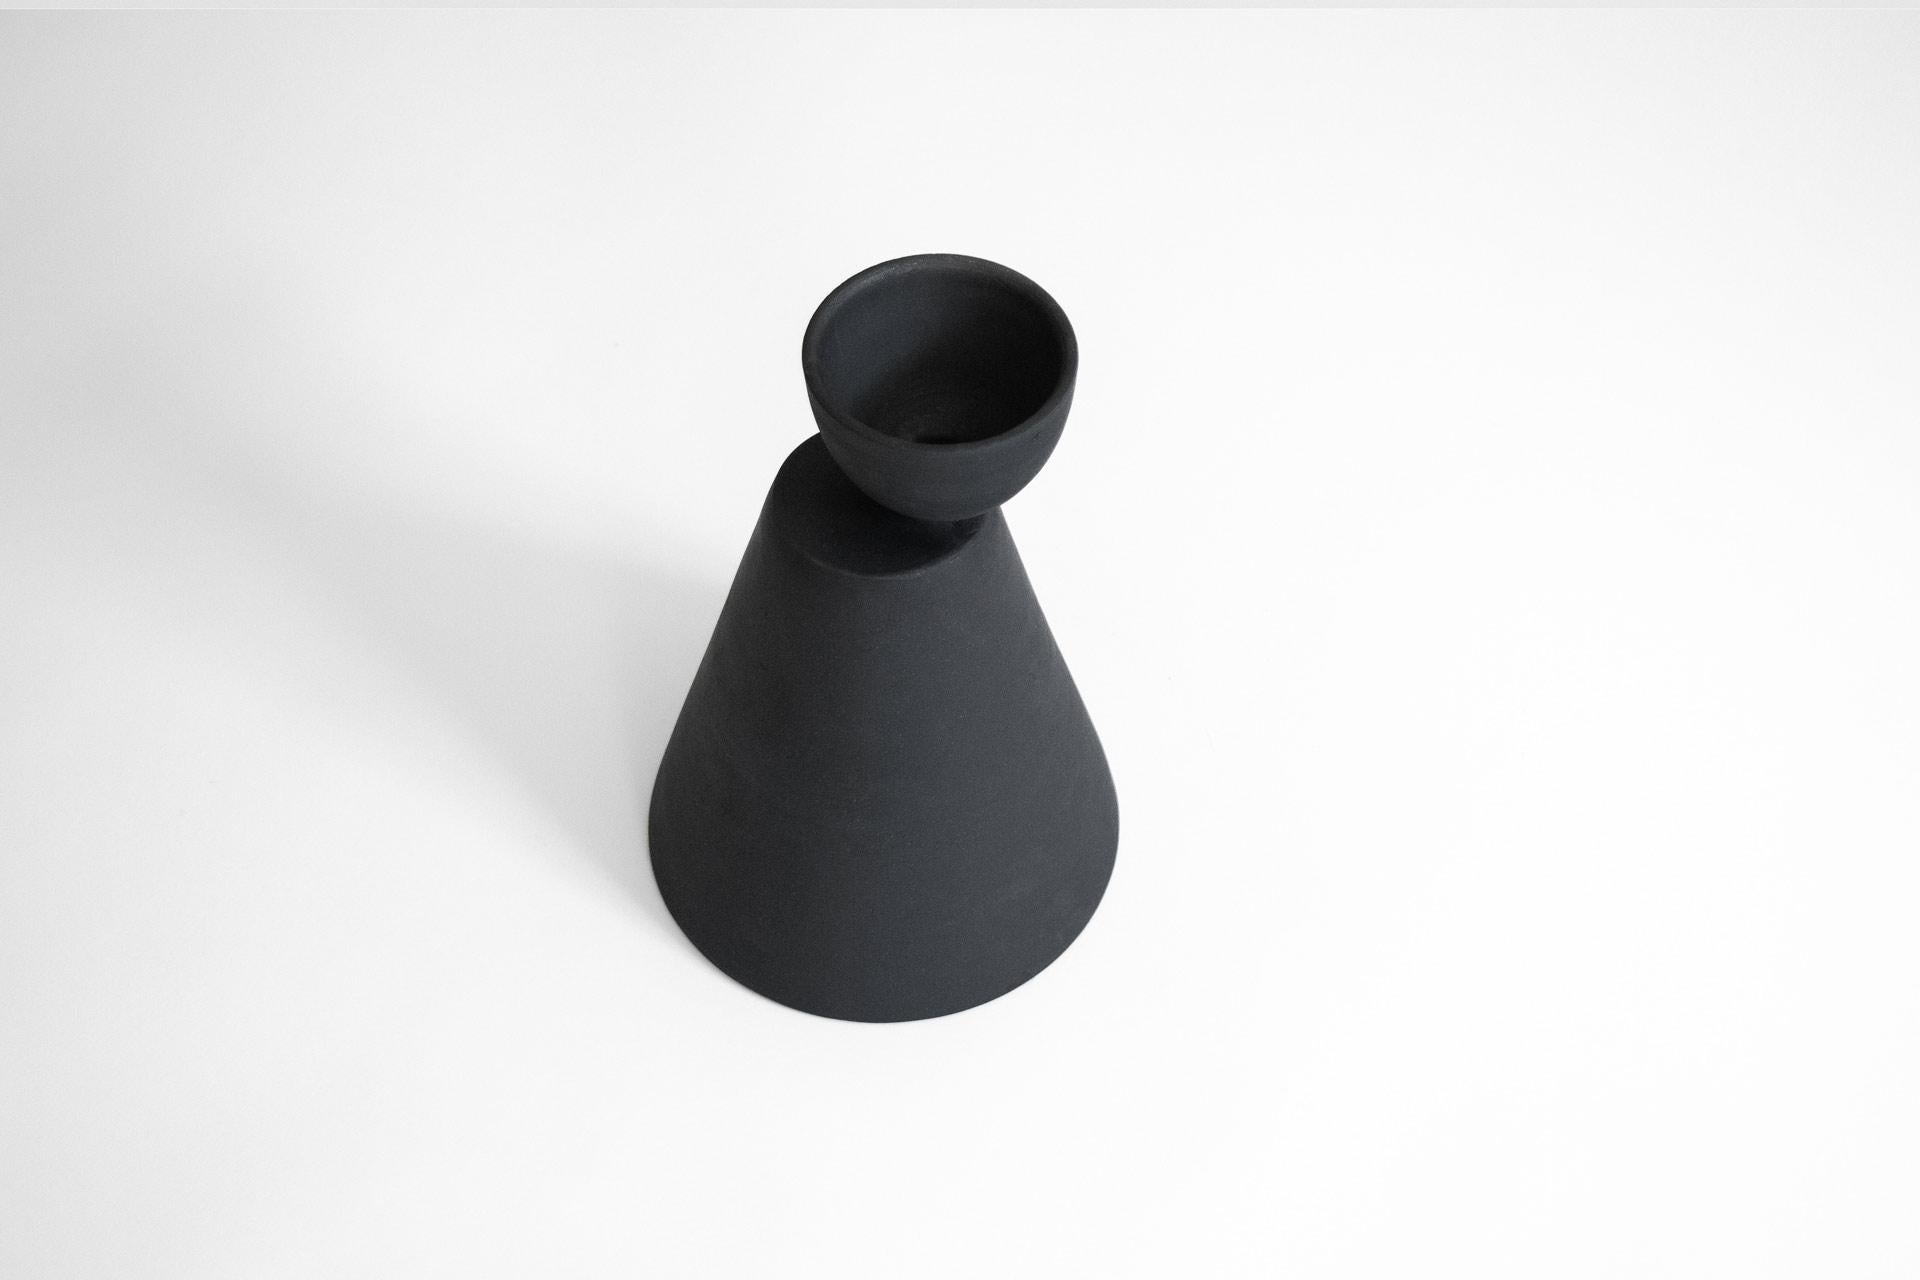 The Cone vase is part of the collection 